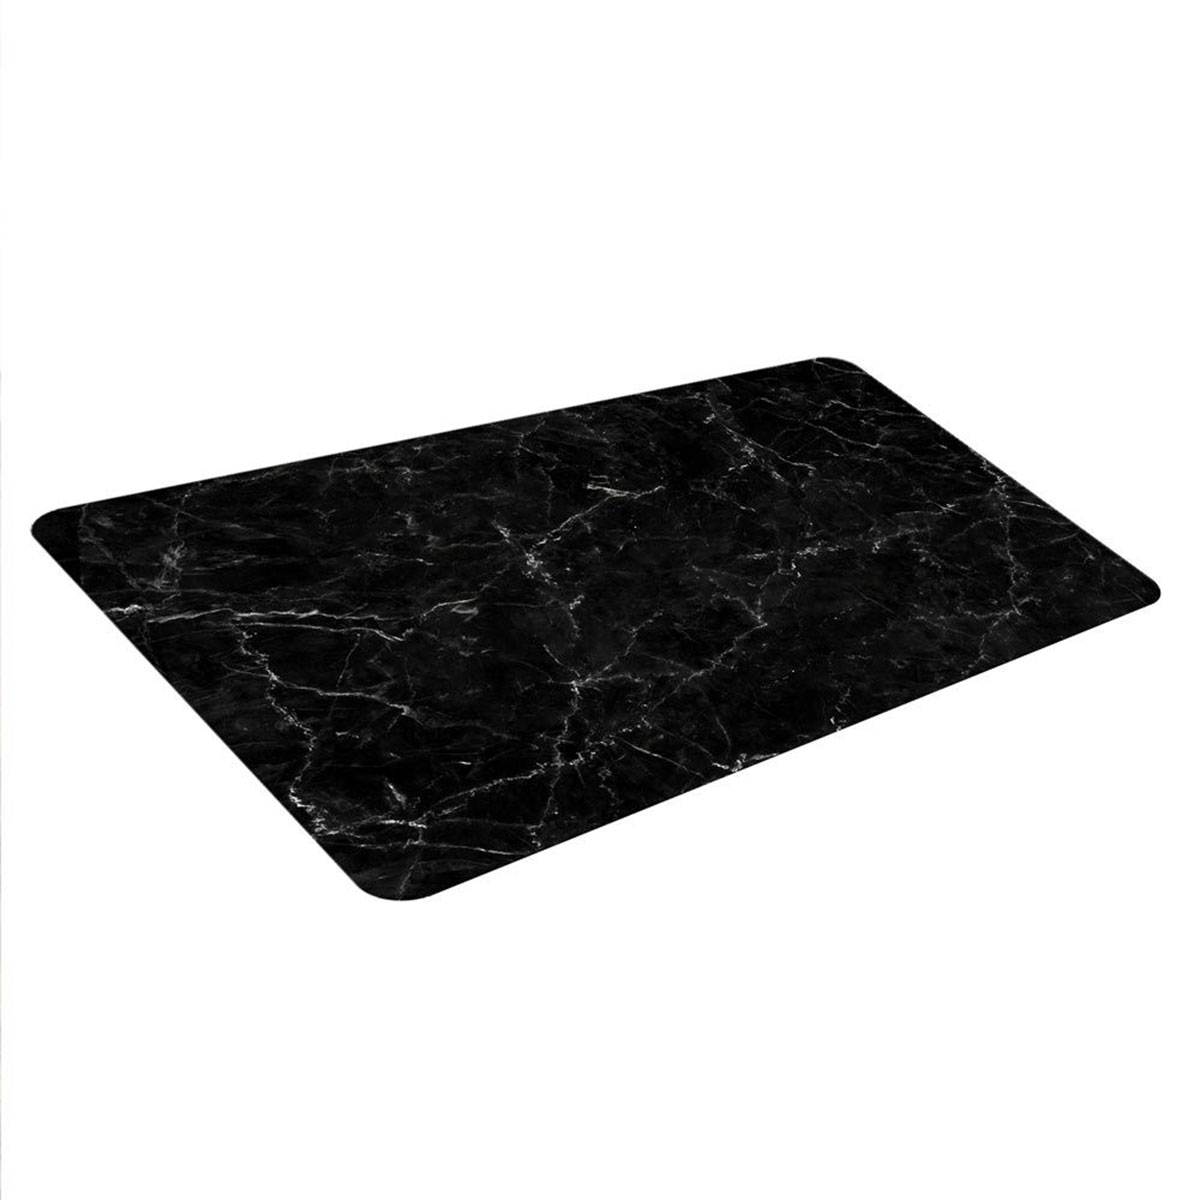 Black marble look placemat